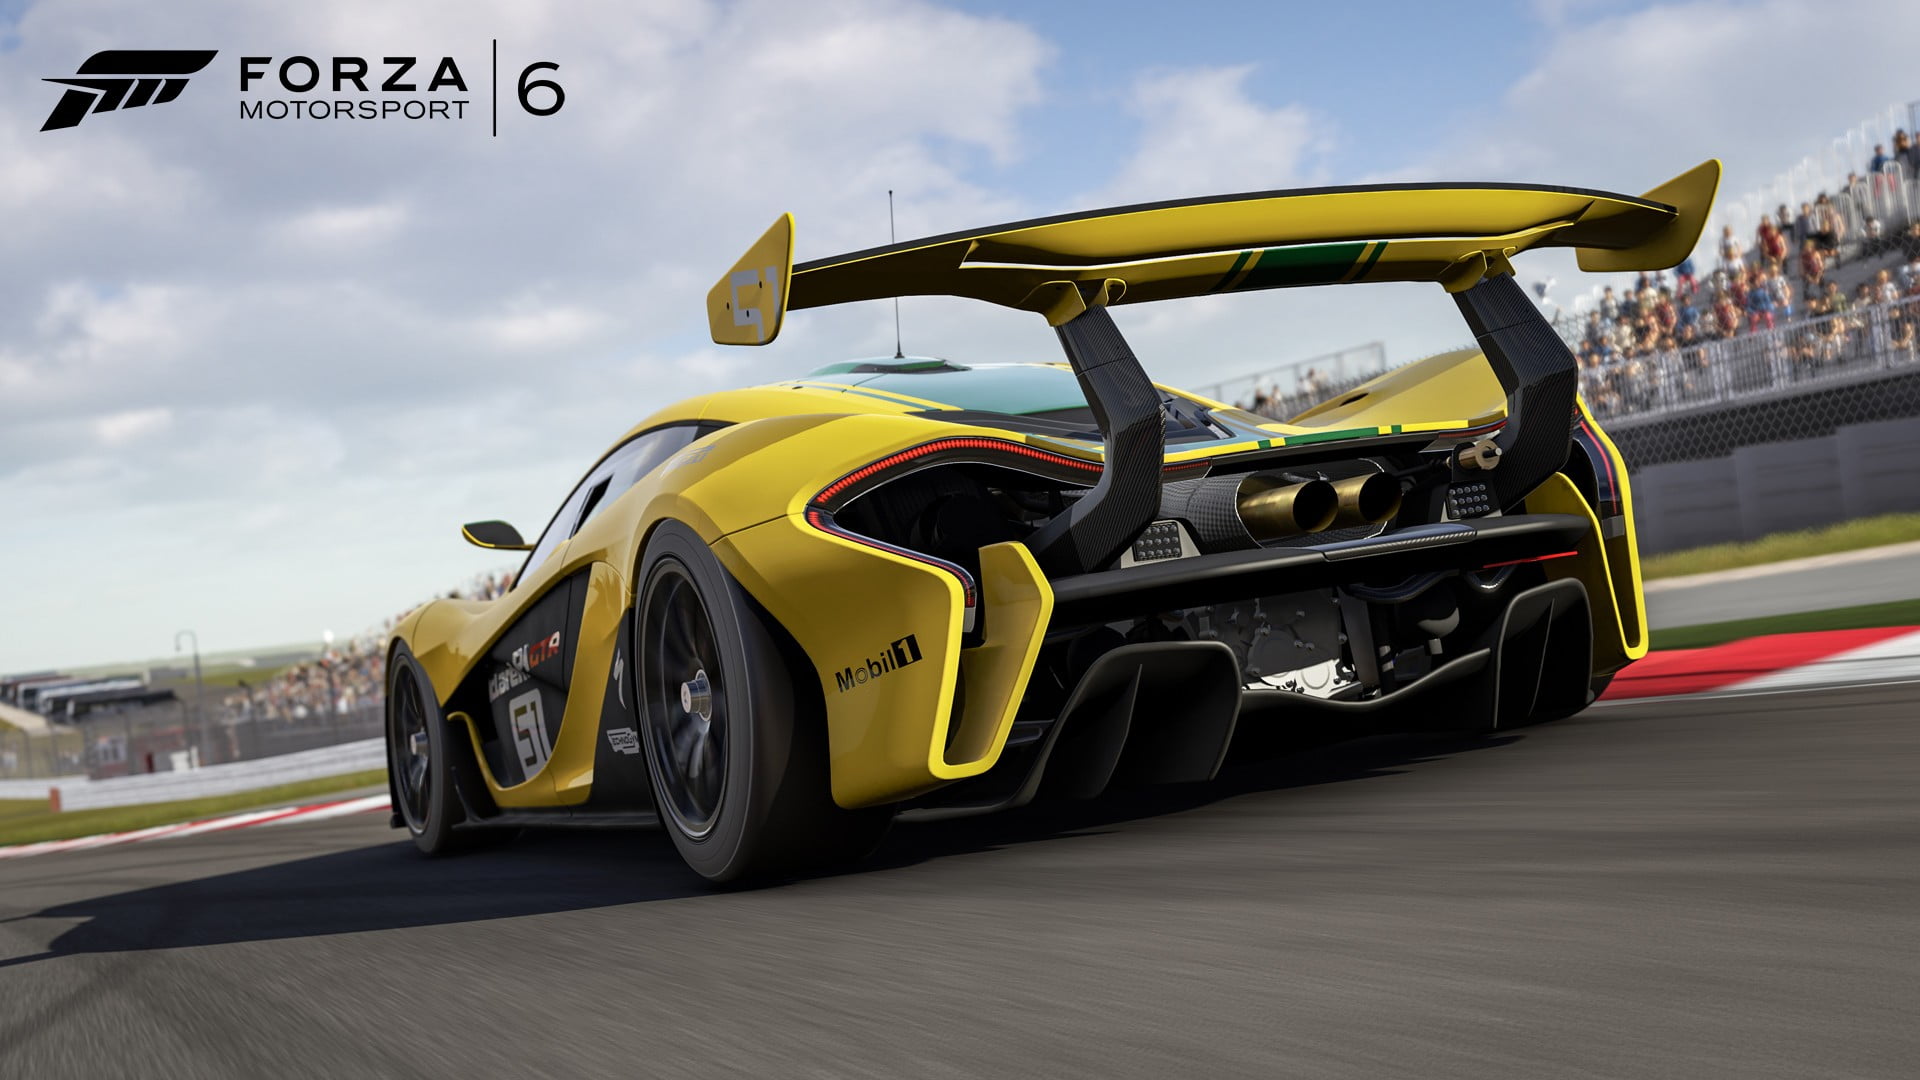 yellow and black Forza Motorsport 6 graphic wallpaper, Forza Motorsport 6, car, McLaren P1, Forza Motorsport